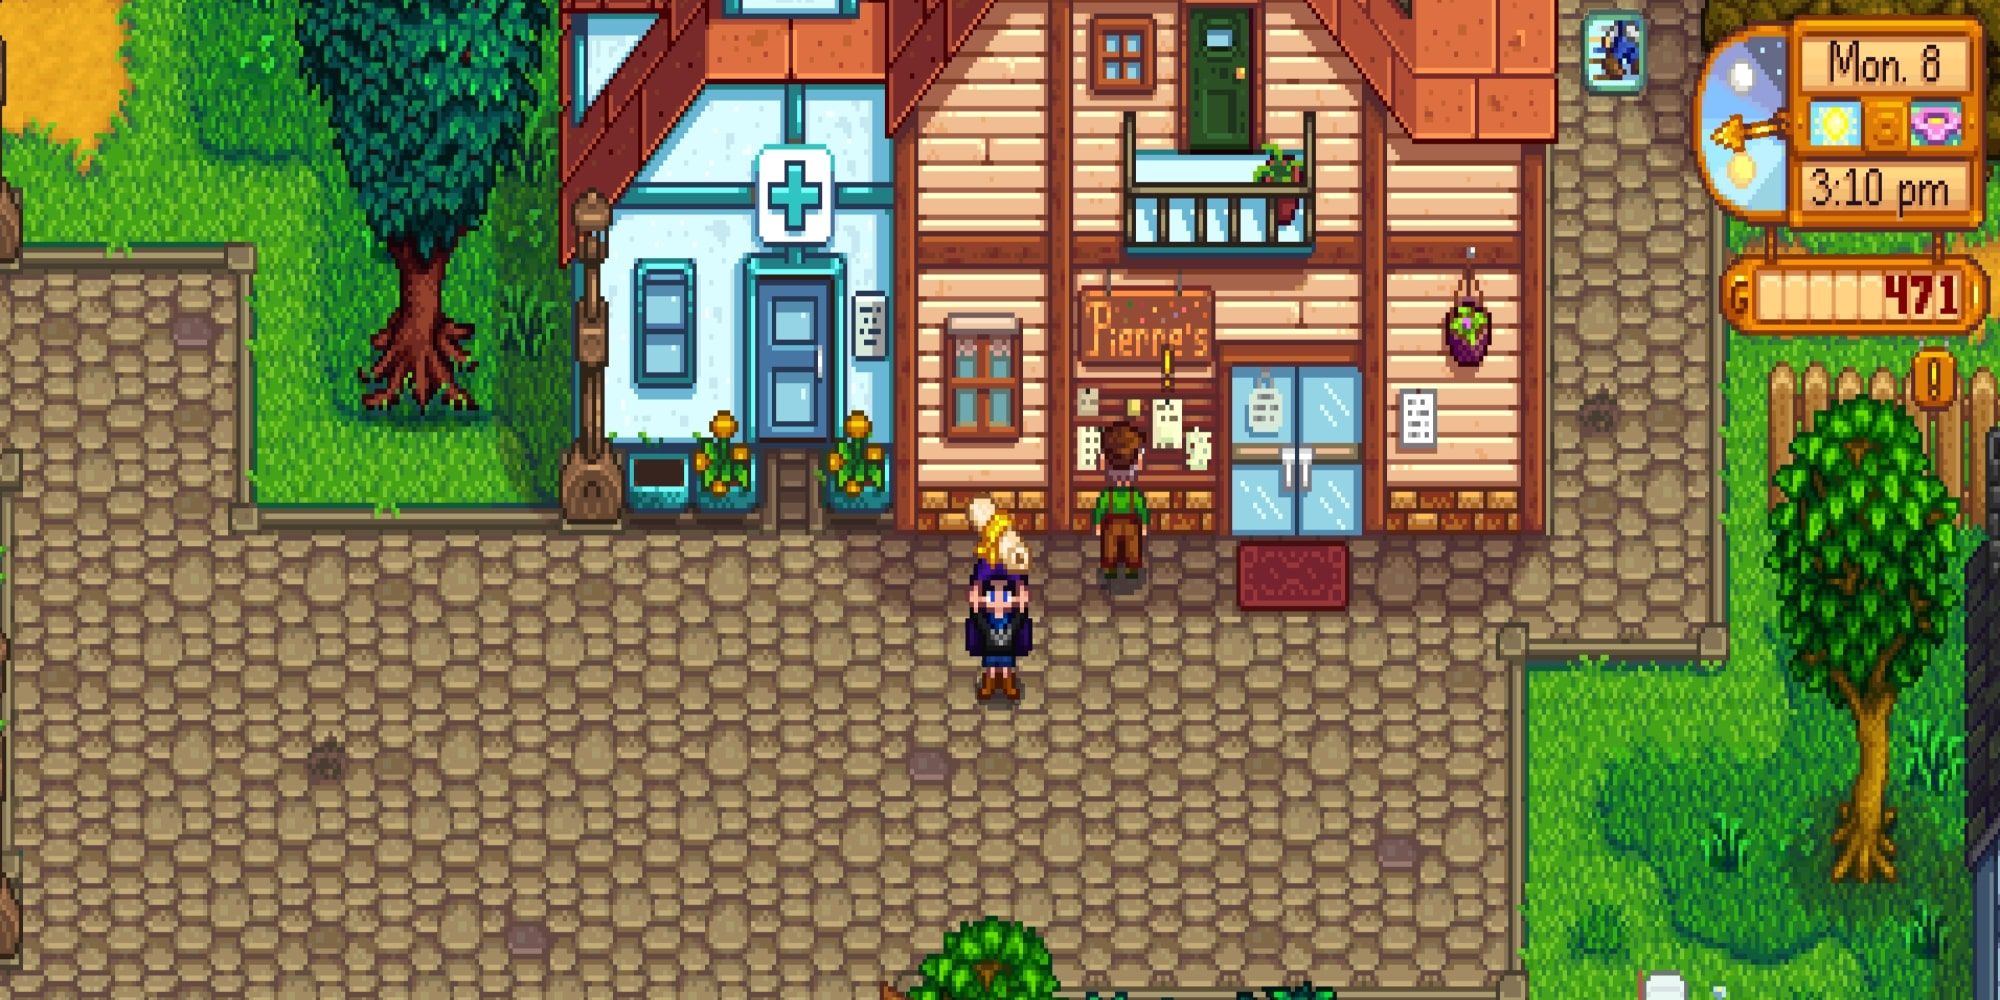 Farmer holding up a scroll in front of Pierre's shop in Stardew Valley